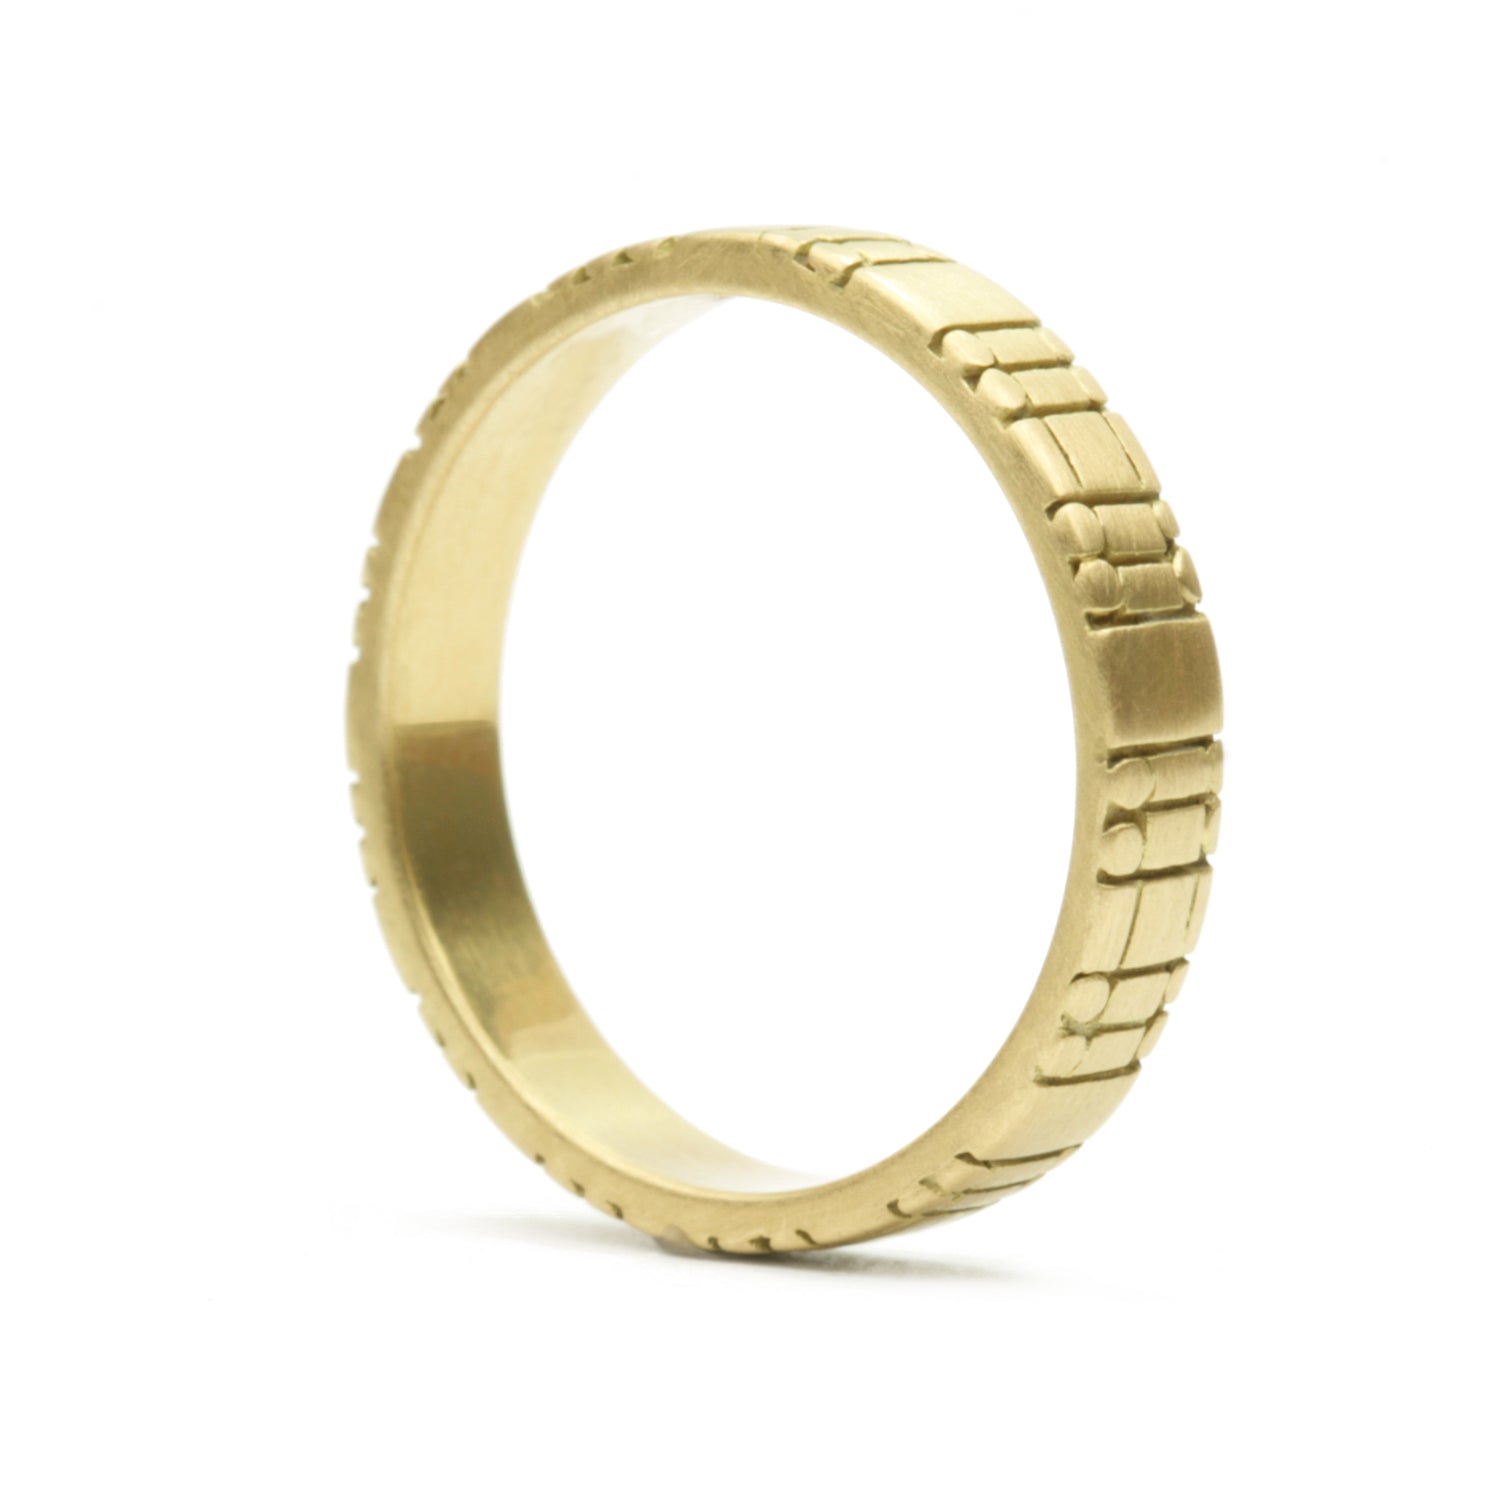 Discover the Morse Code Ring